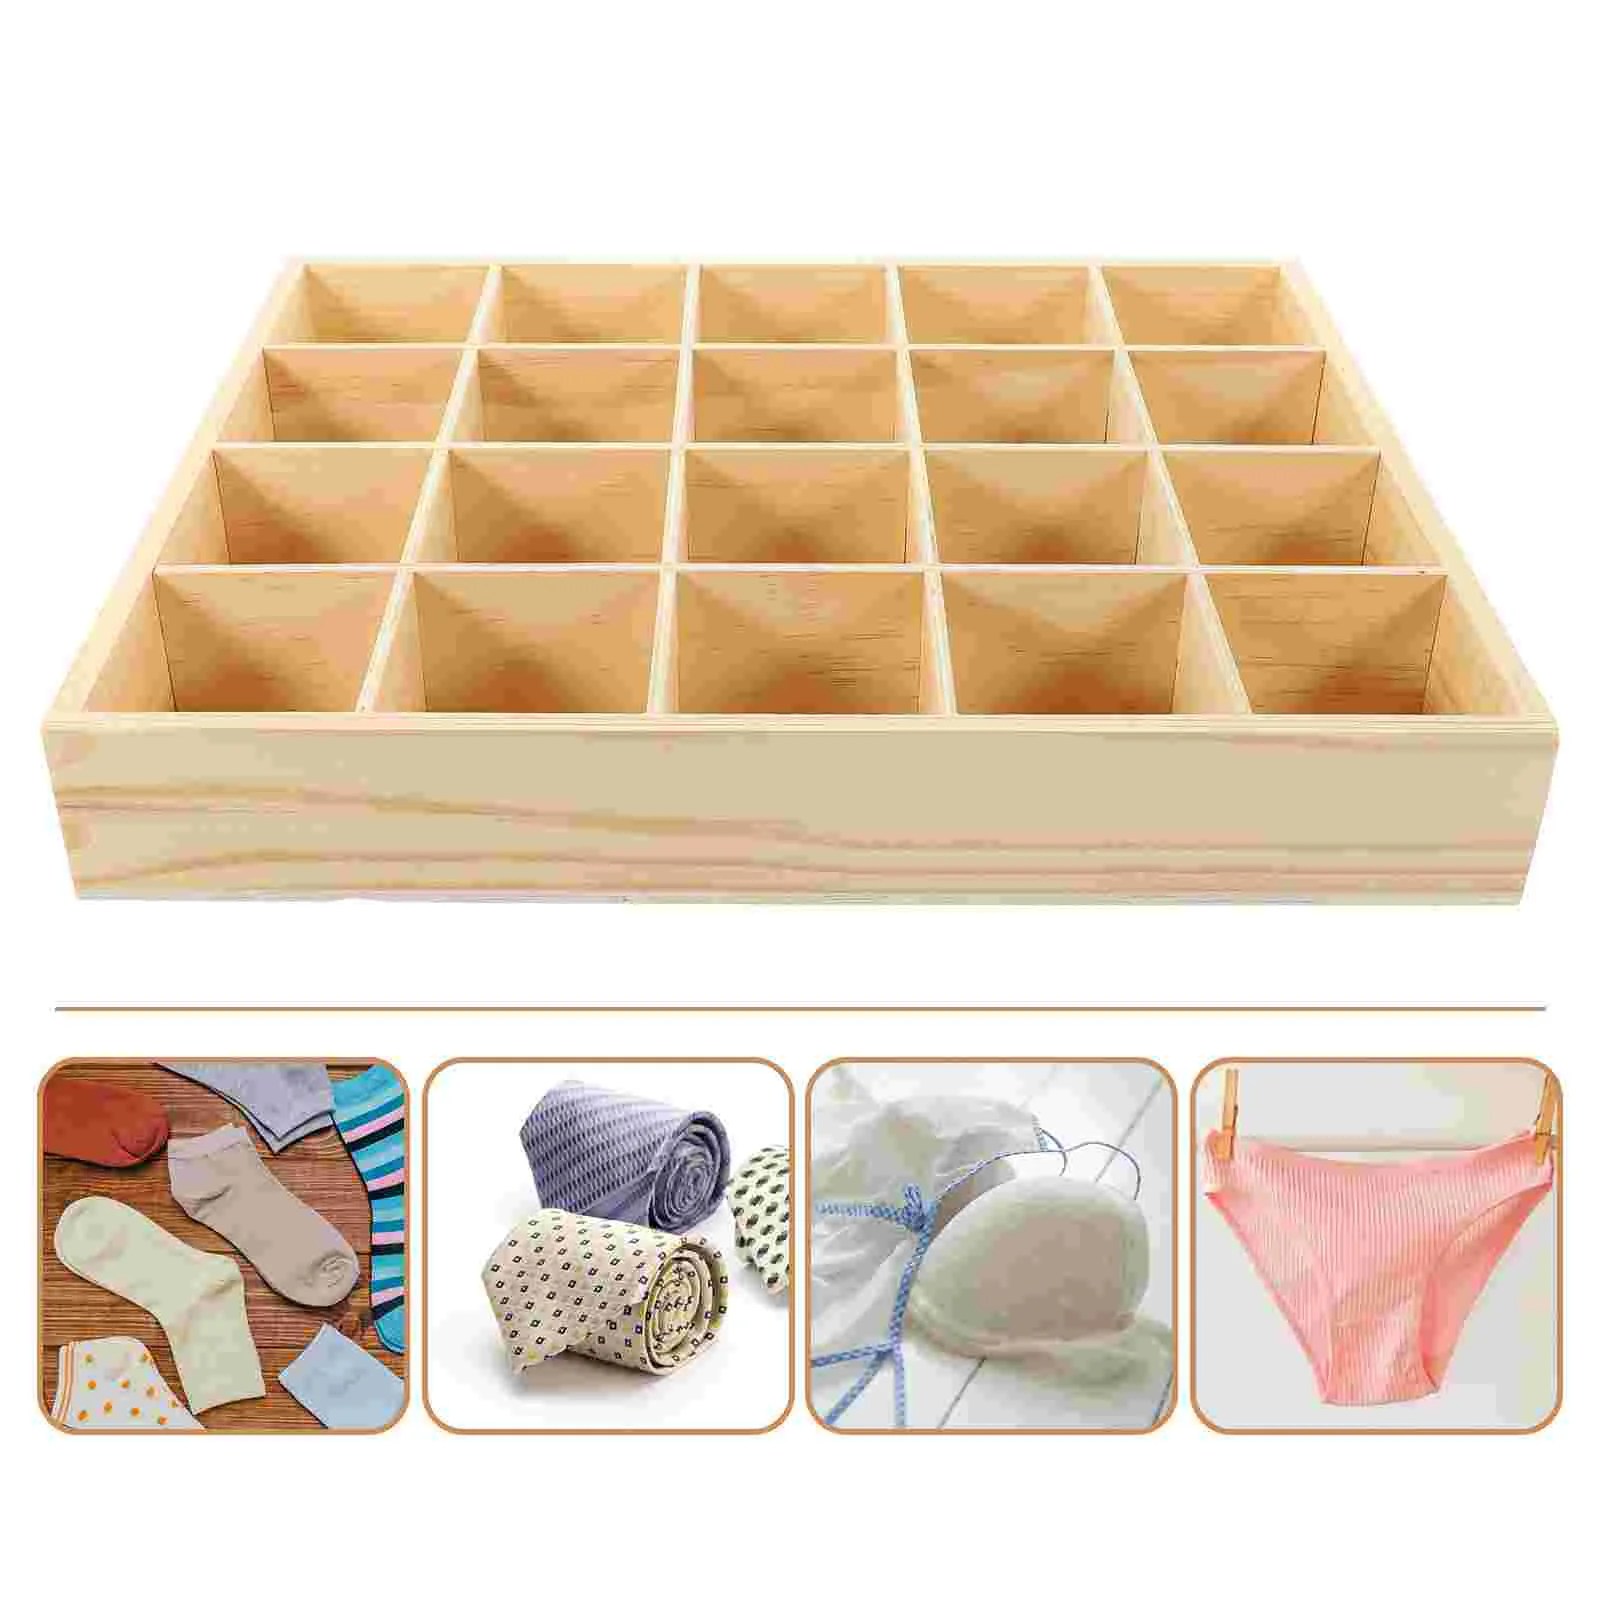 

Sock Organizer Wooden Drawer Organizer Divider, 20 Cell Stable Closet Cabinet Organizer Storage Boxes for Storing Socks, Things